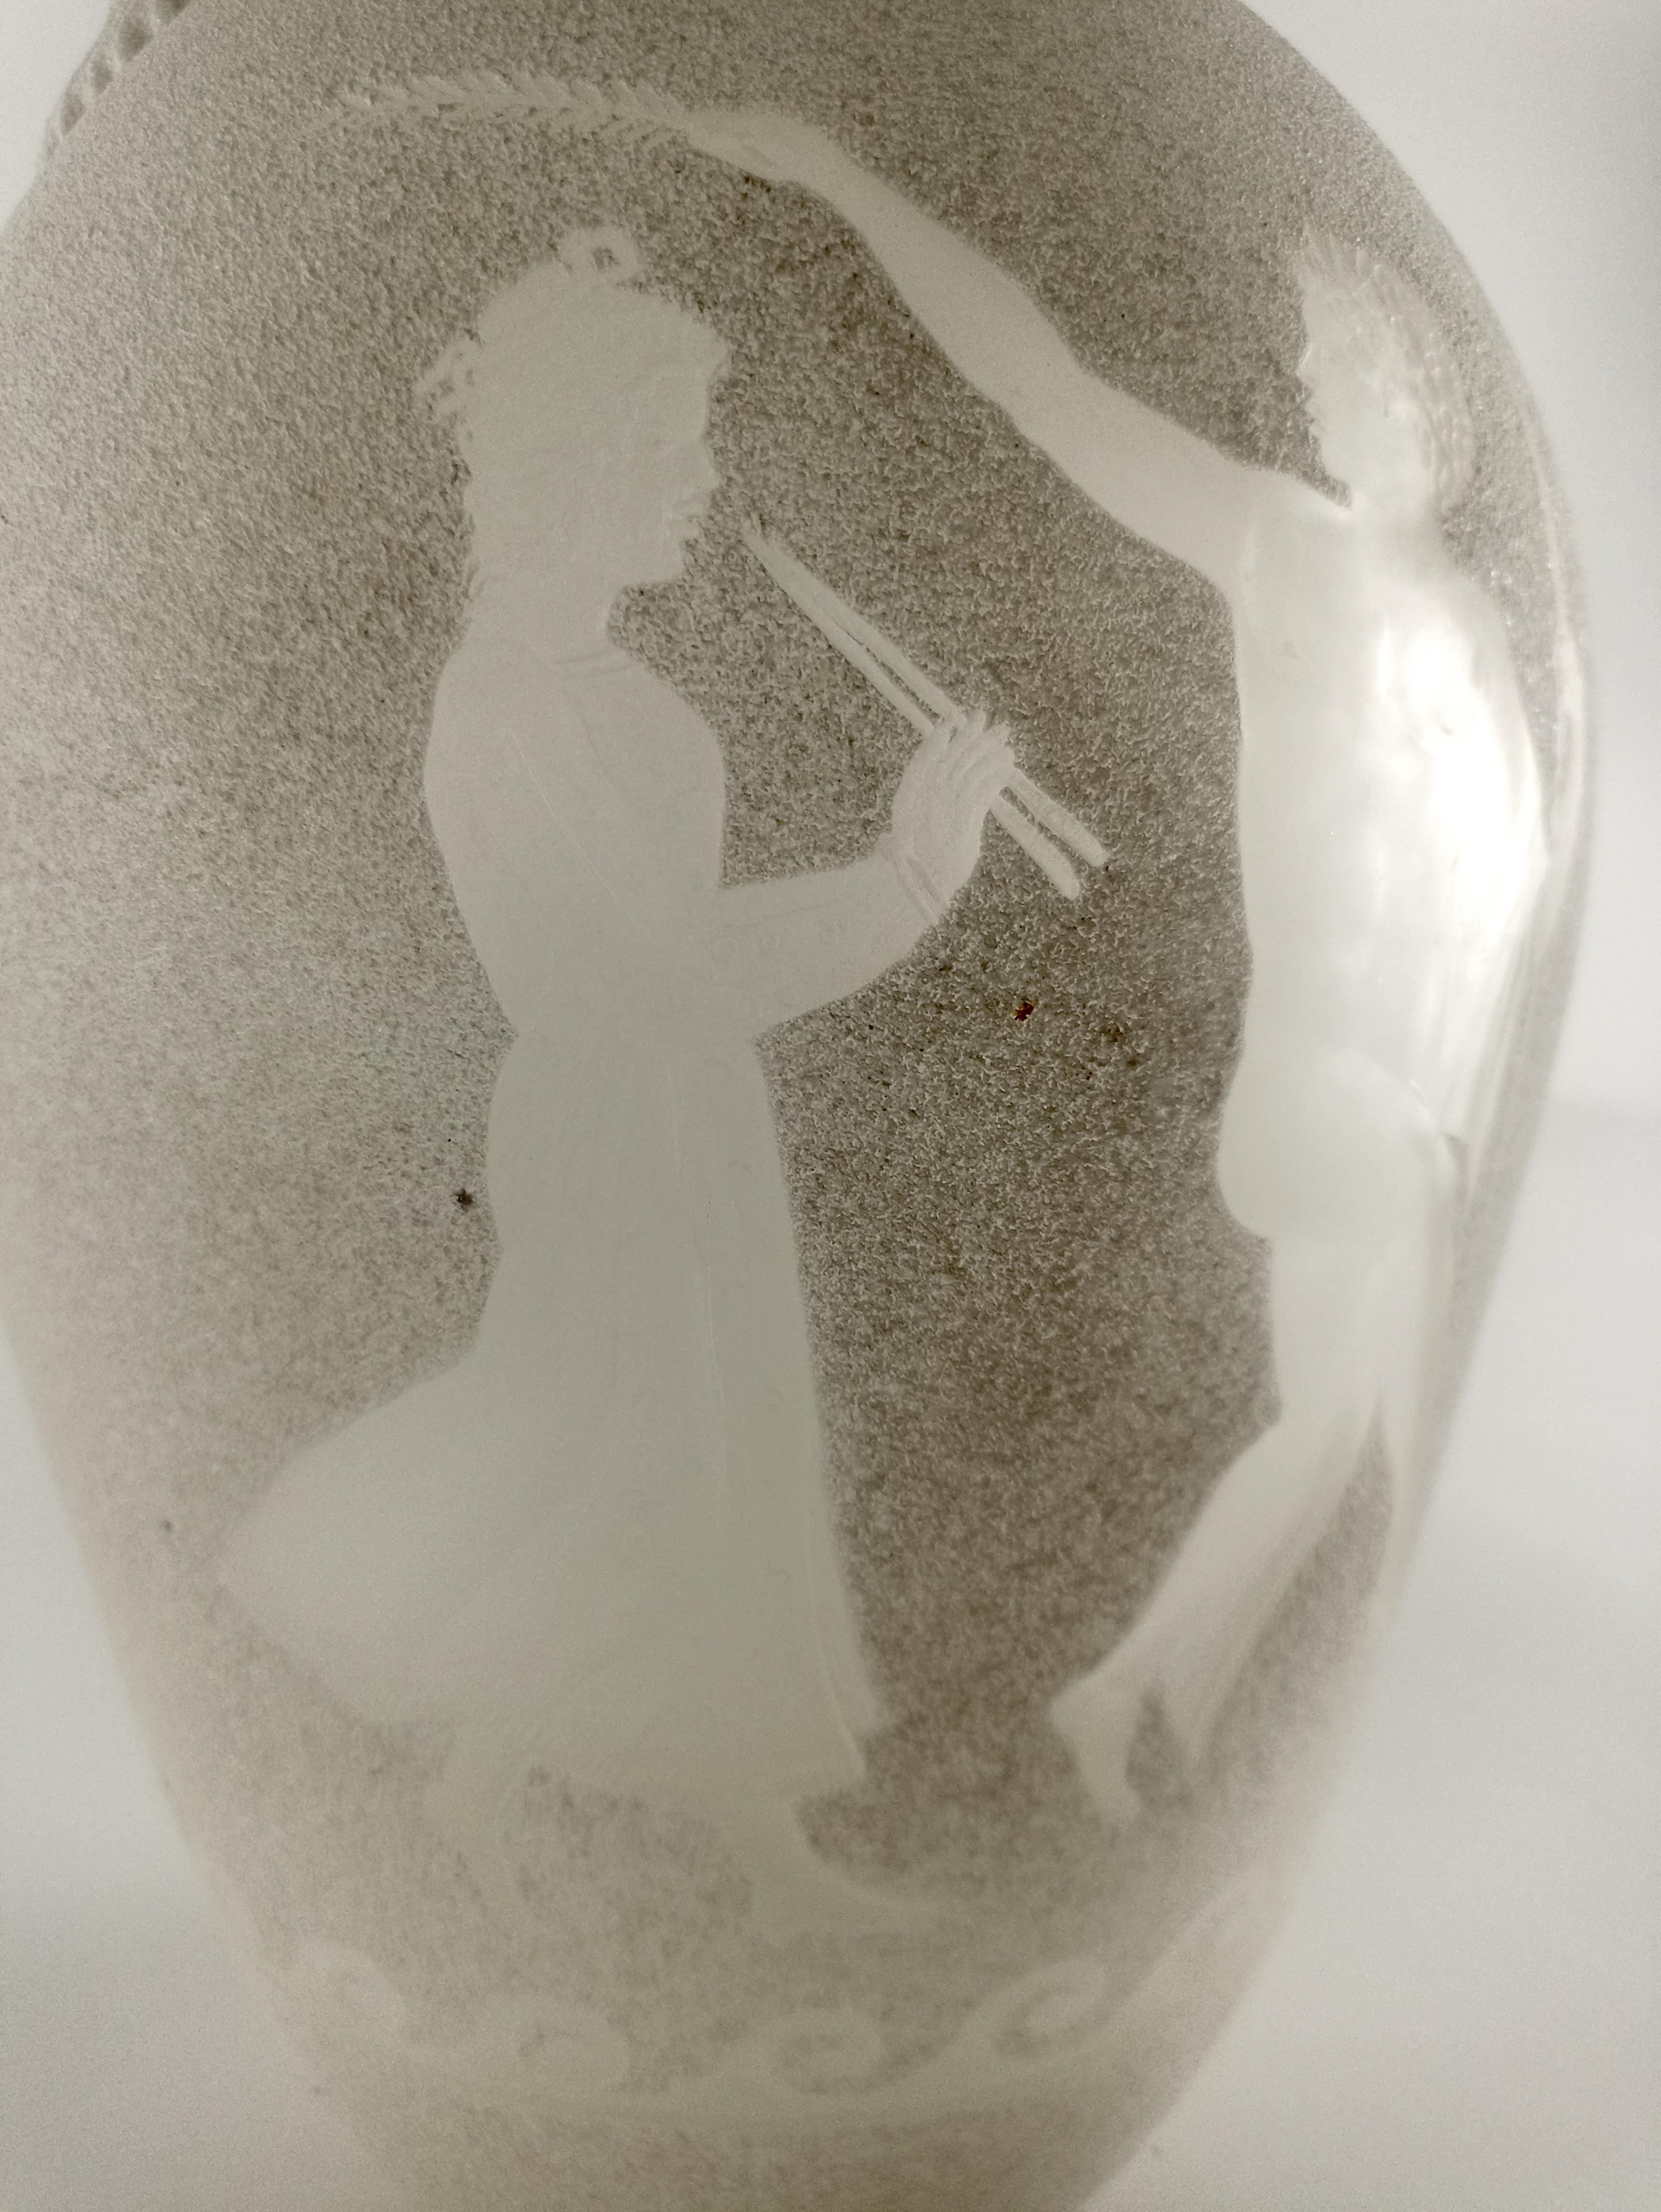 Elevate your home decor with the exquisite Sandblasted Murano Glass Vase - one of the most traditional cold-work Murano glass techniques. This elegant and classic vase features a beautifully engraved Greek image on the front, adding a touch of